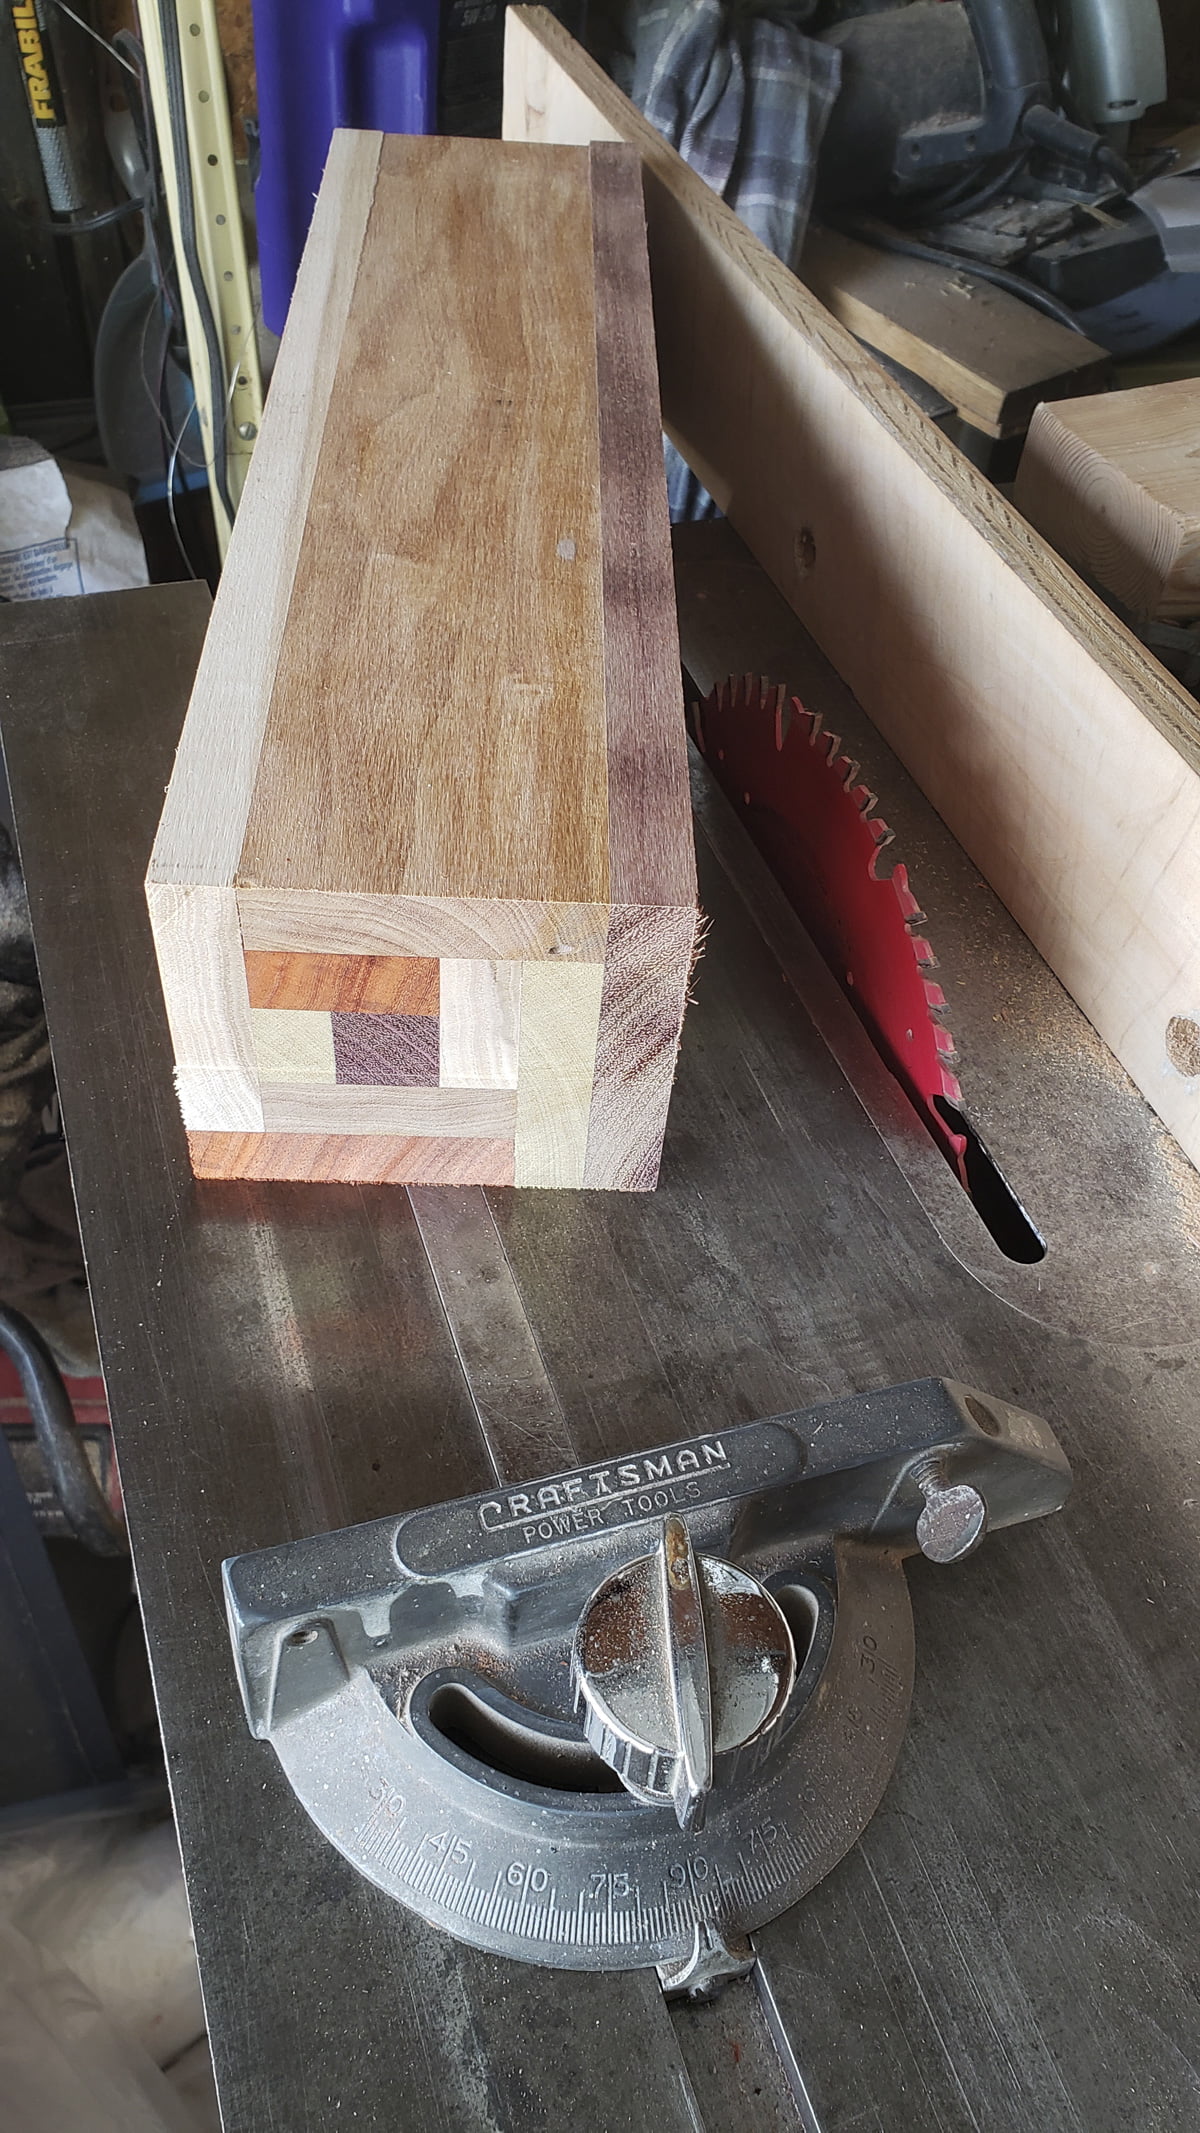 A rectangular block, made from several smaller pieces of different colored wood, is on top of a table saw.